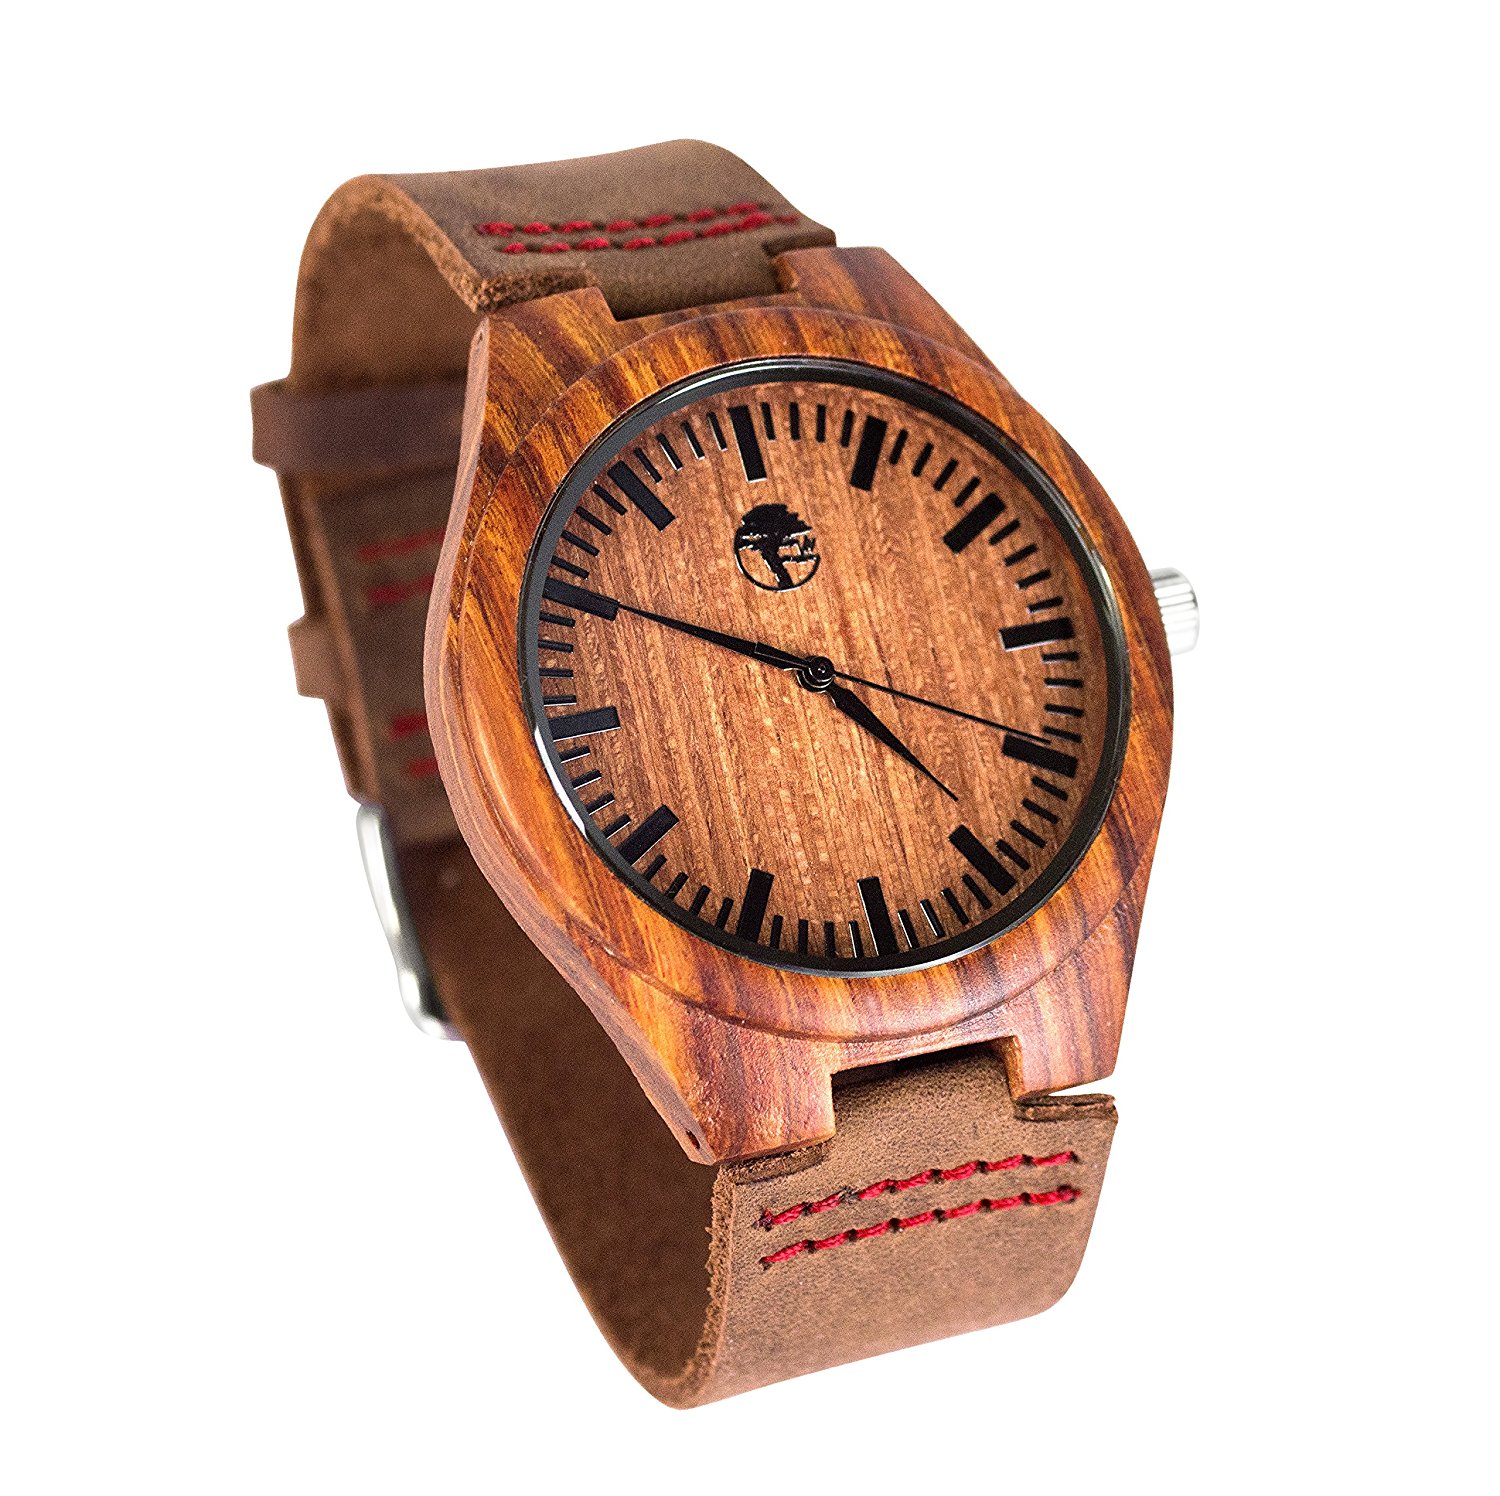 Amazon.com: Men's Wood Watch, Natural Bamboo and Sandalwood with ...